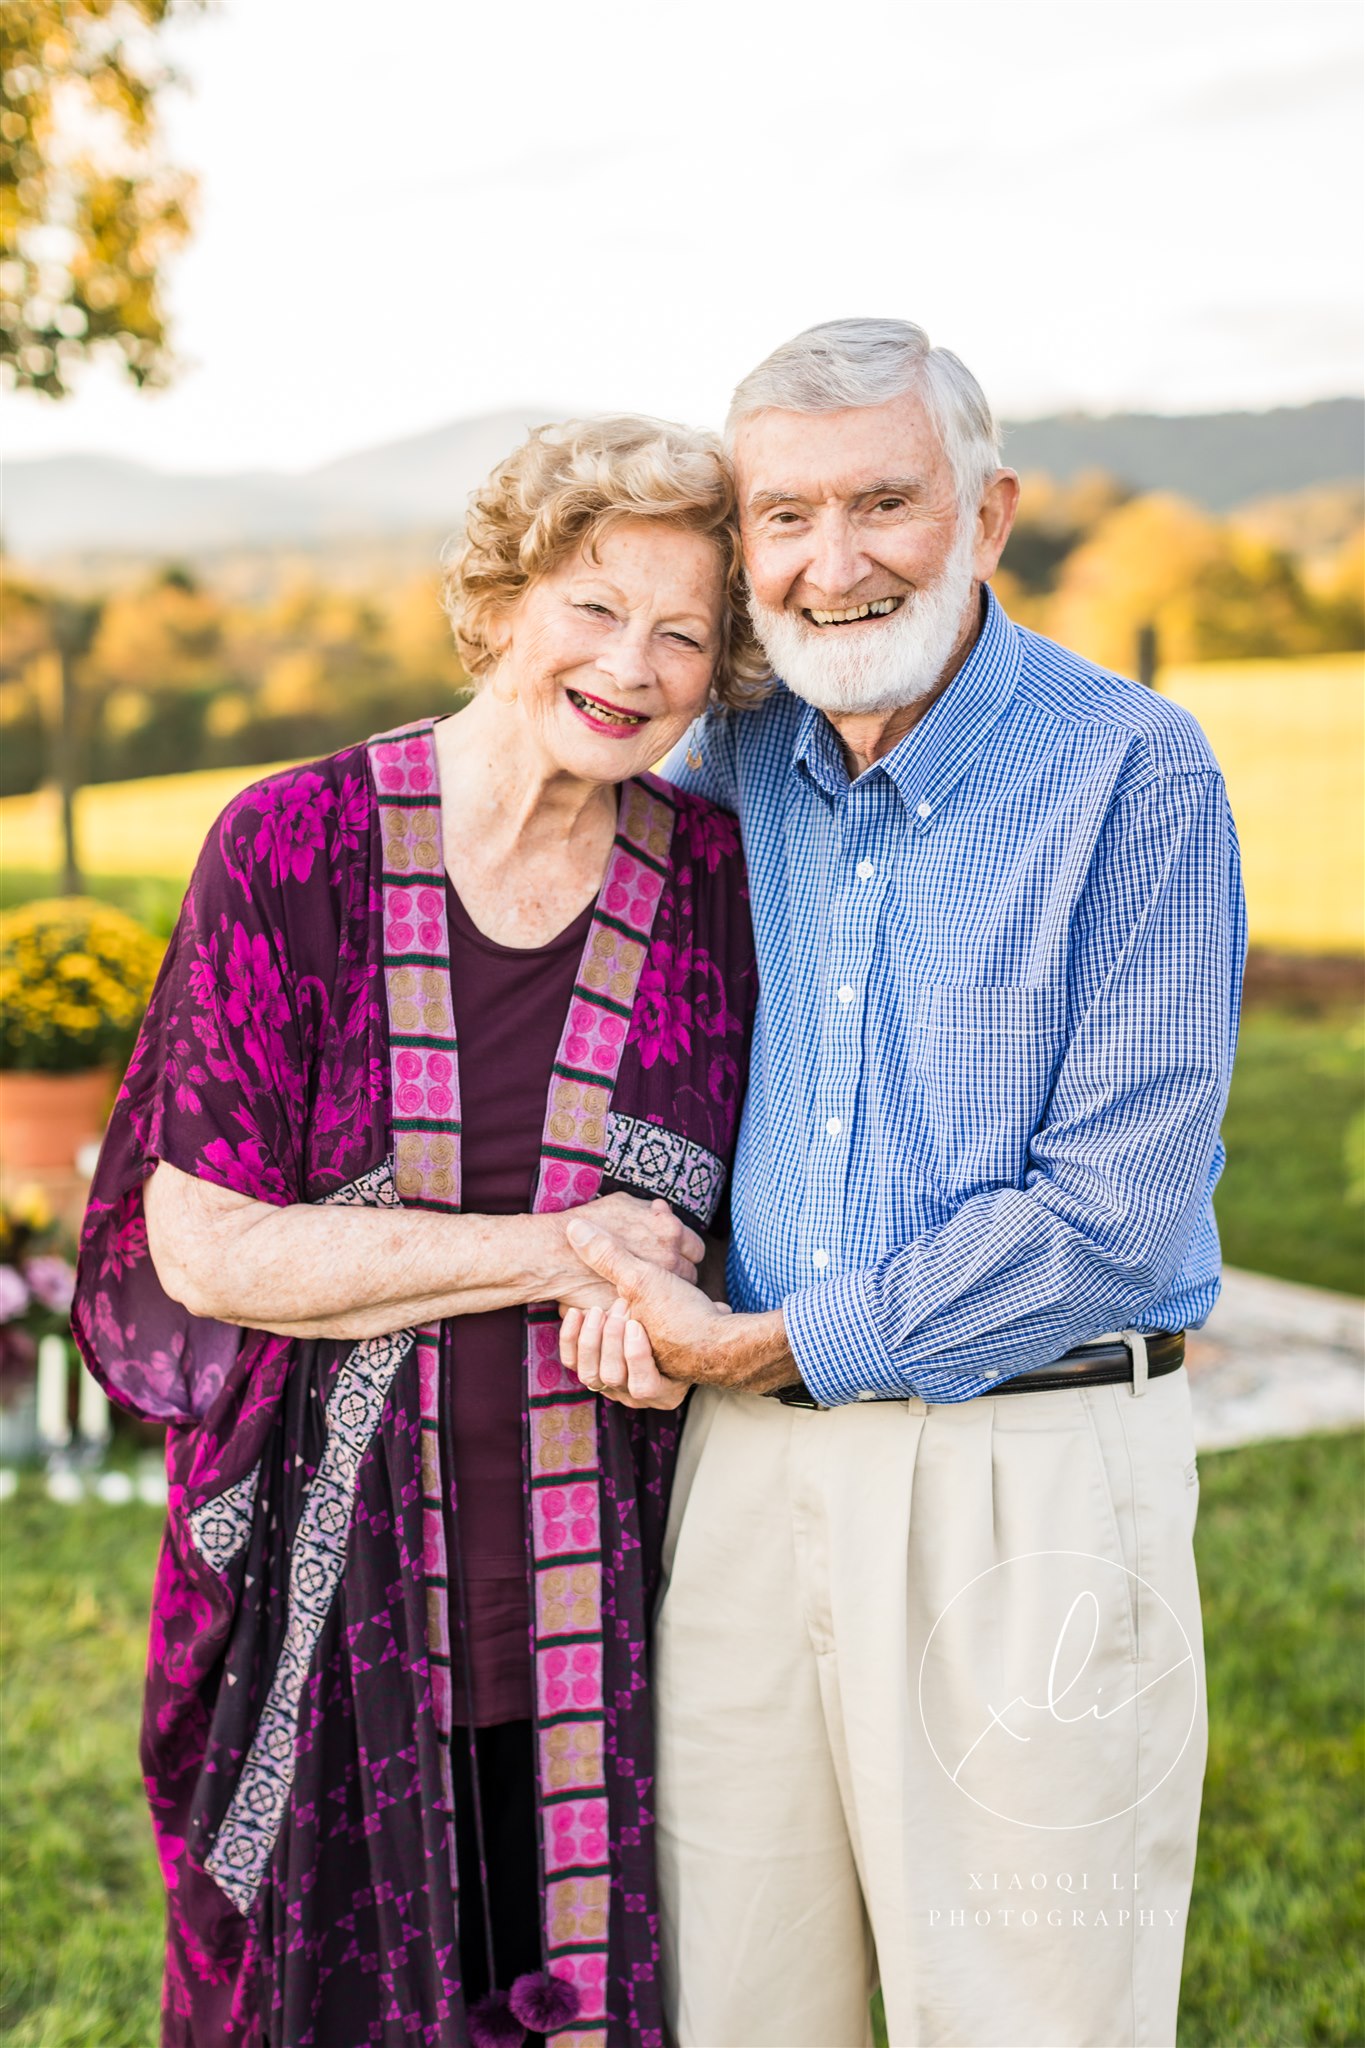 couple's grandparents smiling during celebration of couple